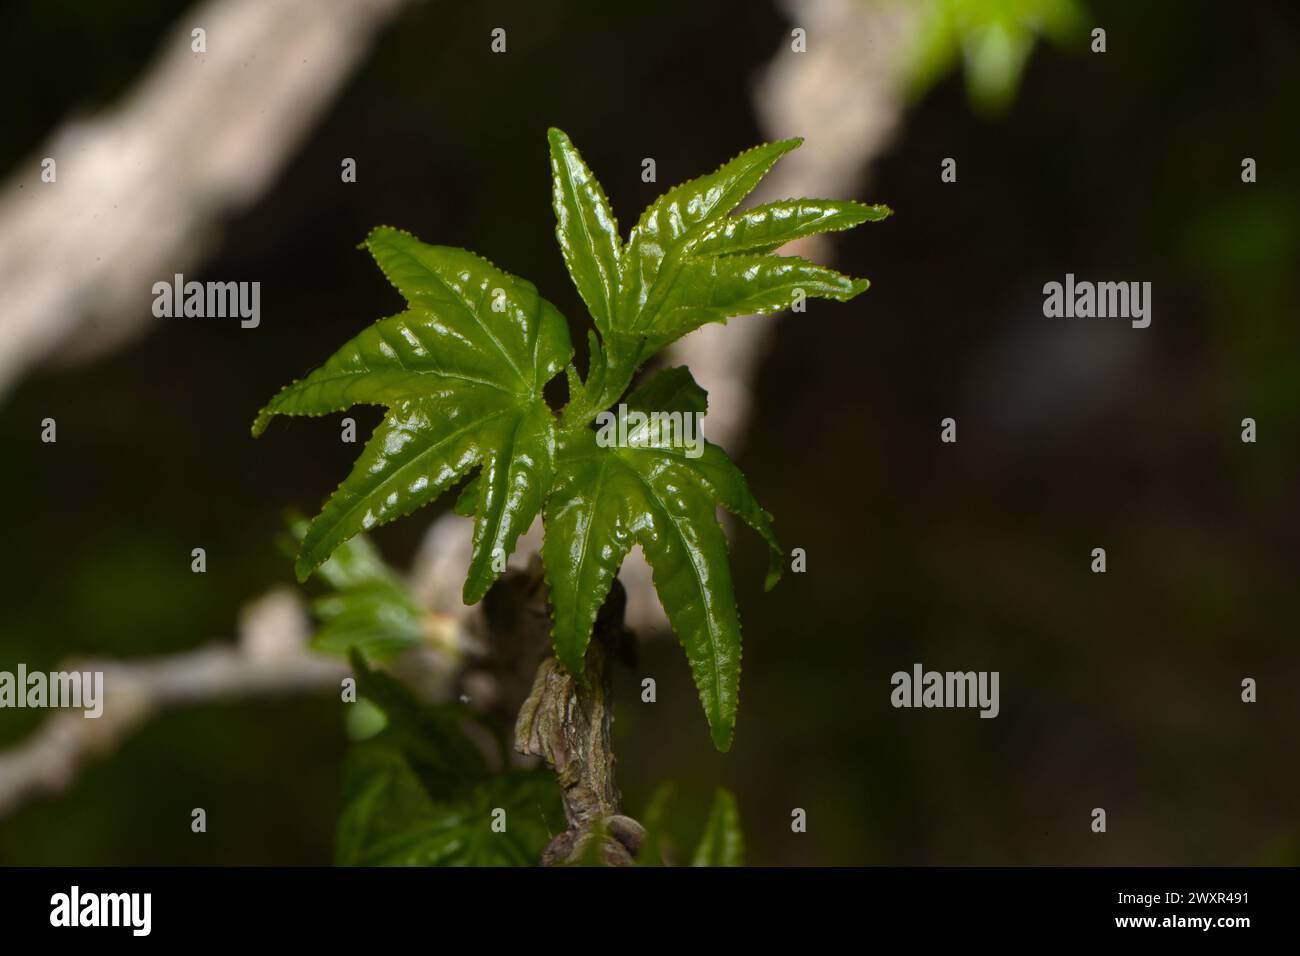 It's spring and the trees are budding. Stock Photo